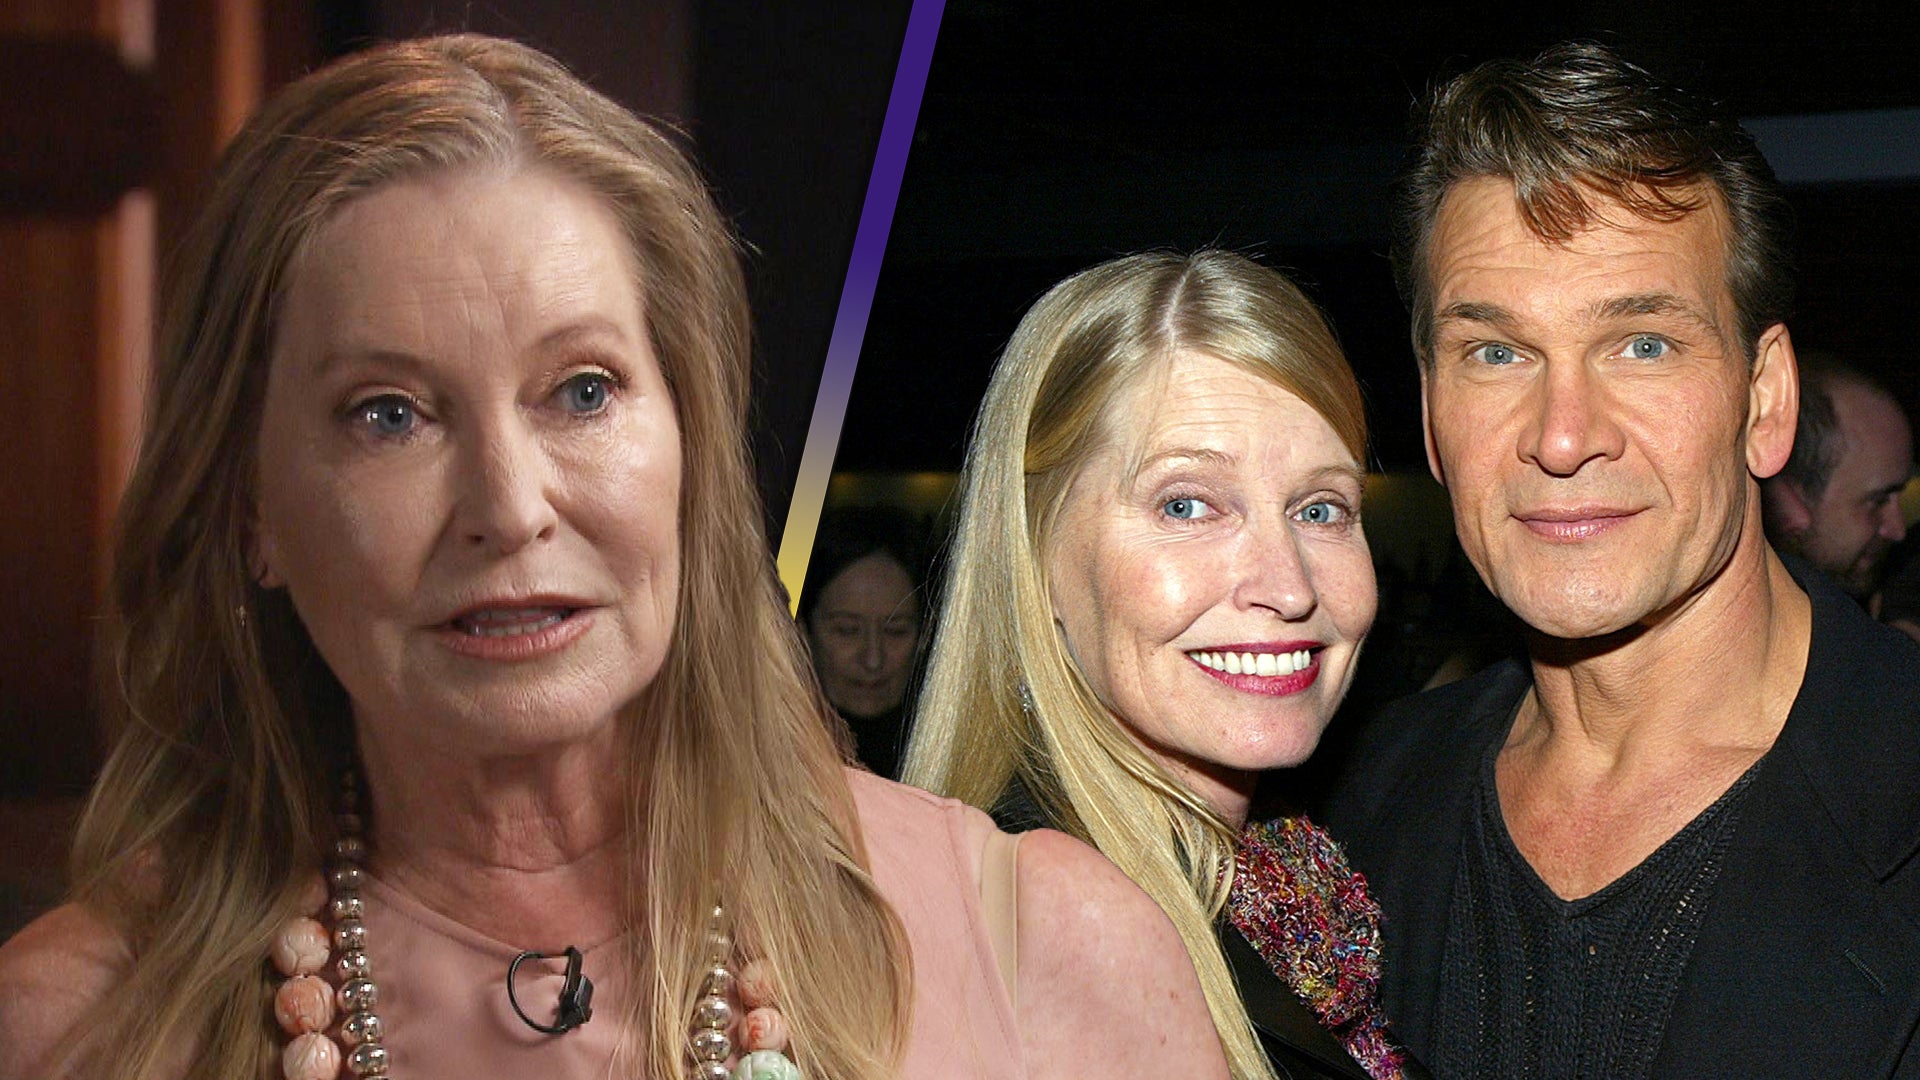 Patrick Swayze's Widow Lisa Niemi Says He Visited Her in a Dream to Bless Her Second Marriage